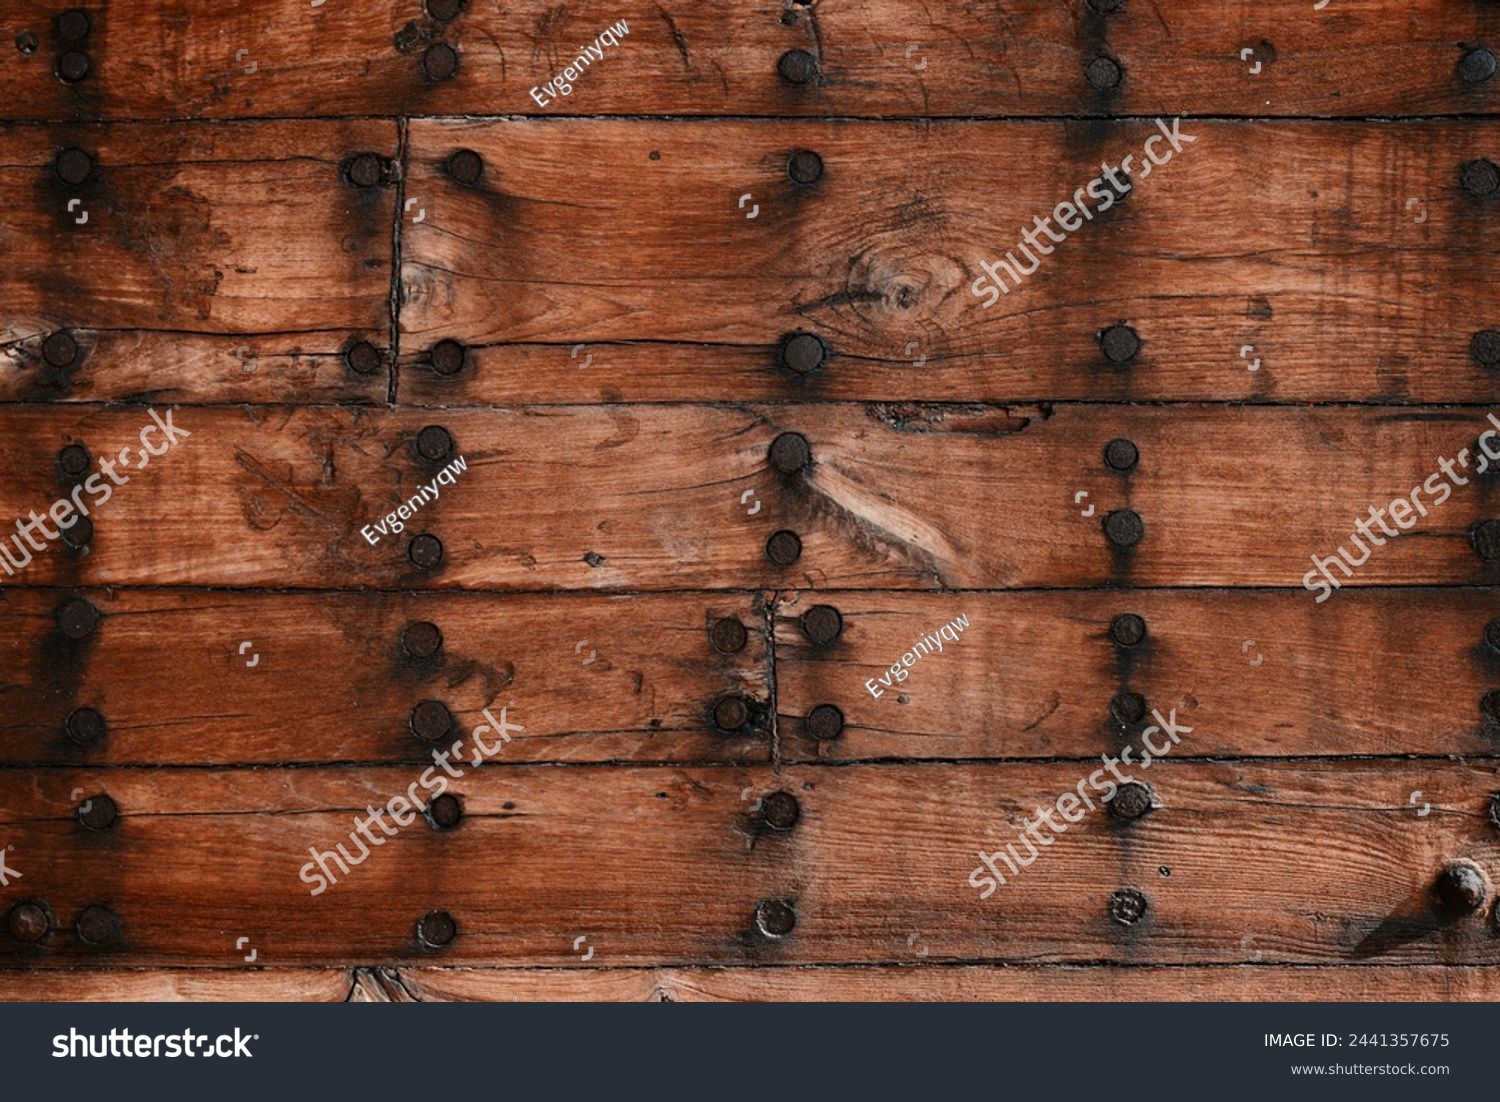 Construction of a wooden ship. Shipyard of traditional Dhow wooden boat on Iranian Qeshm Island. Board of Tradition Lenz Fishing Boat in Southern Iran. Old wooden stealth smuggler's ship. #2441357675